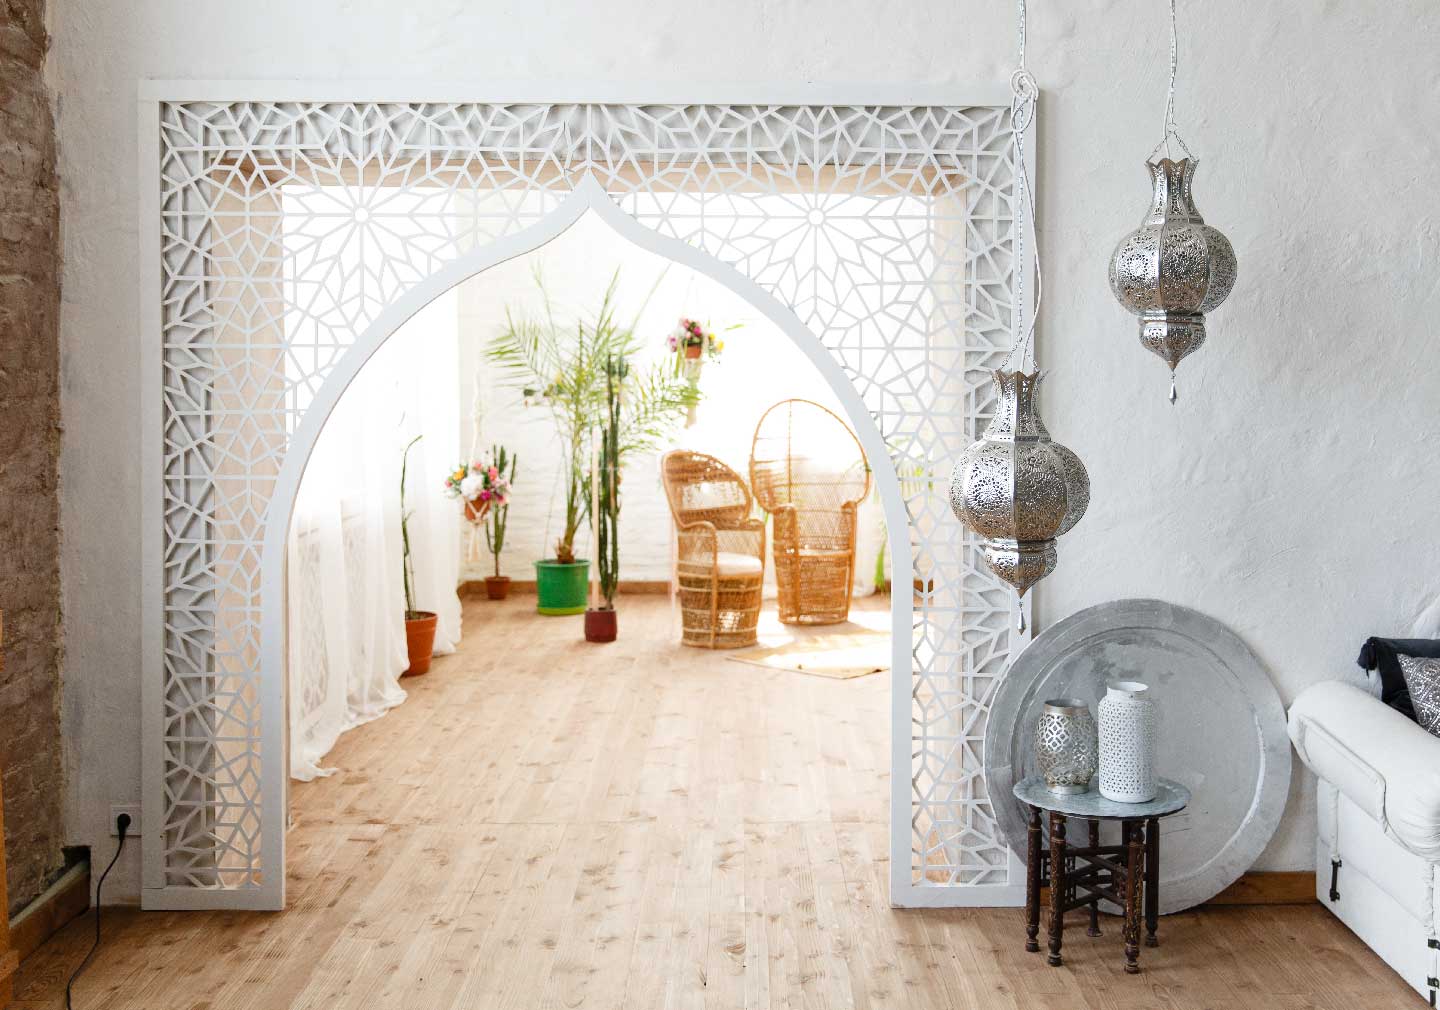 A Tale of Timeless Beauty in moroccan interior designs